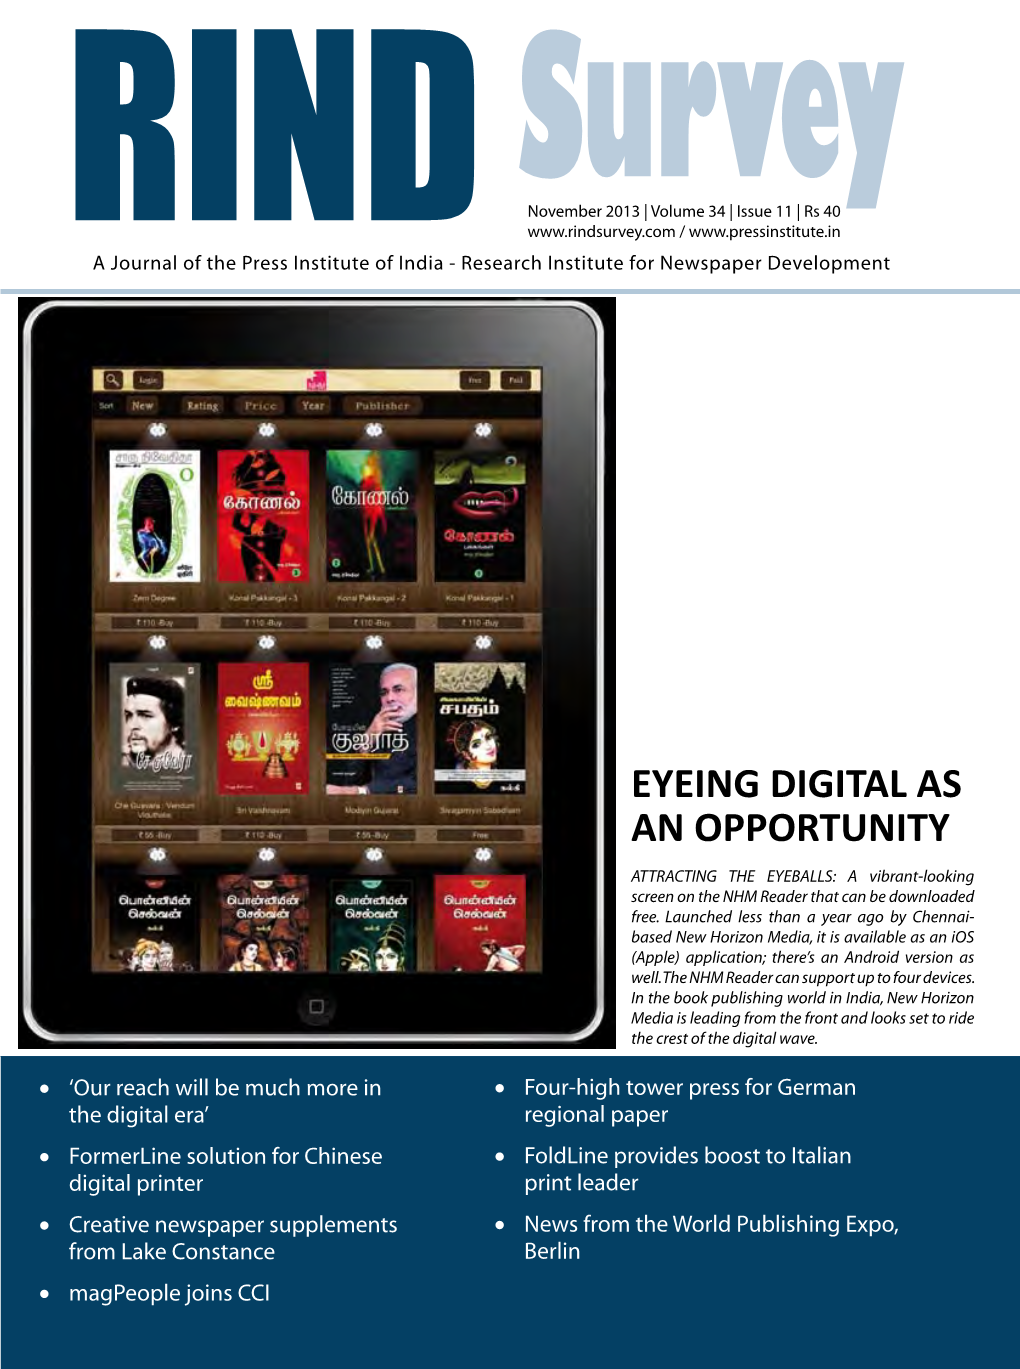 EYEING DIGITAL AS an OPPORTUNITY ATTRACTING the EYEBALLS: a Vibrant-Looking Screen on the NHM Reader That Can Be Downloaded Free